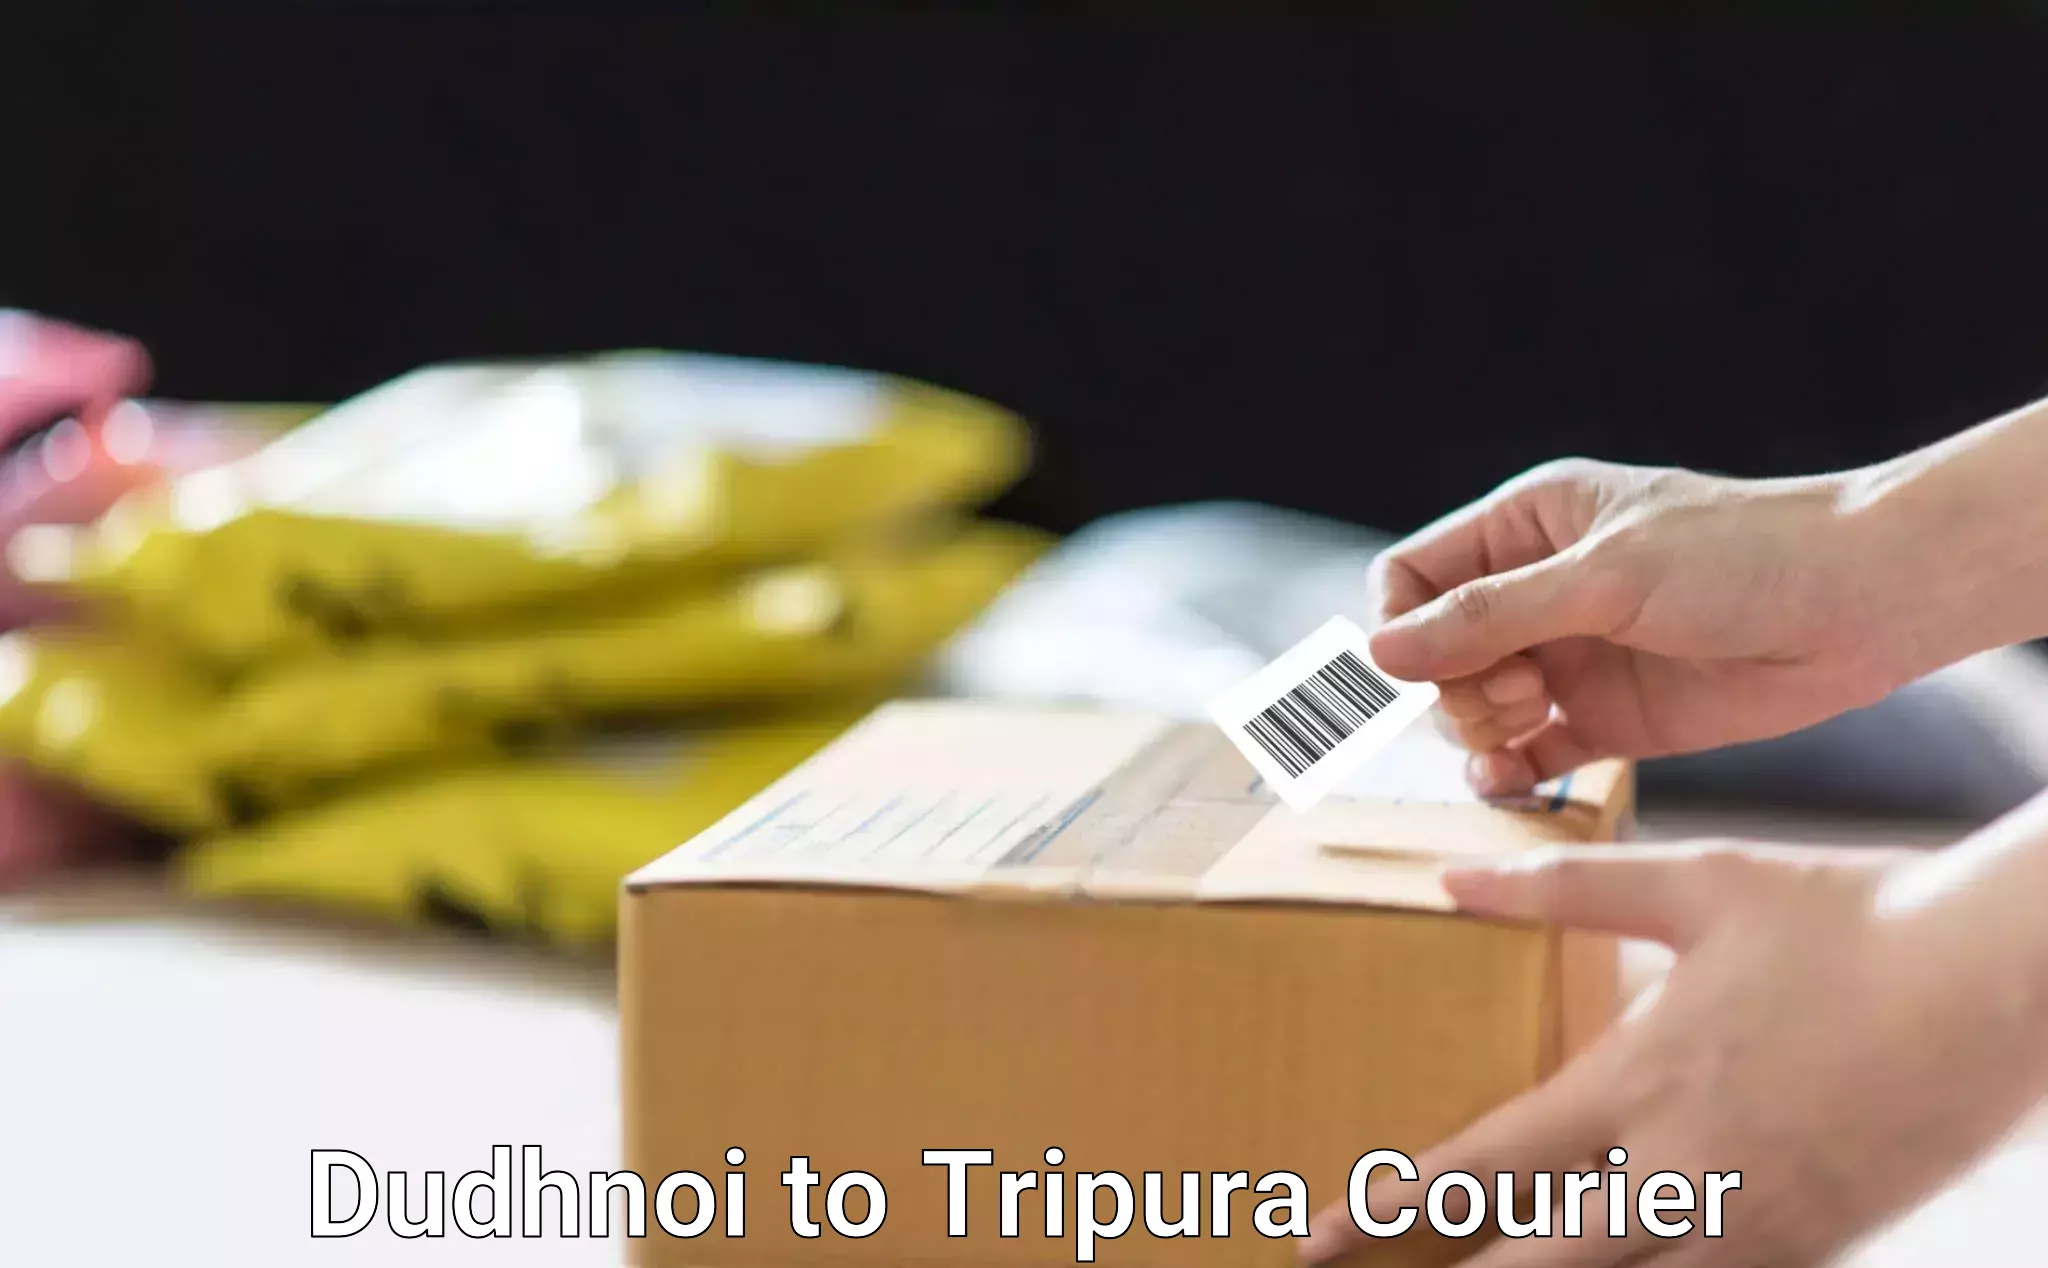 Global delivery options Dudhnoi to Tripura